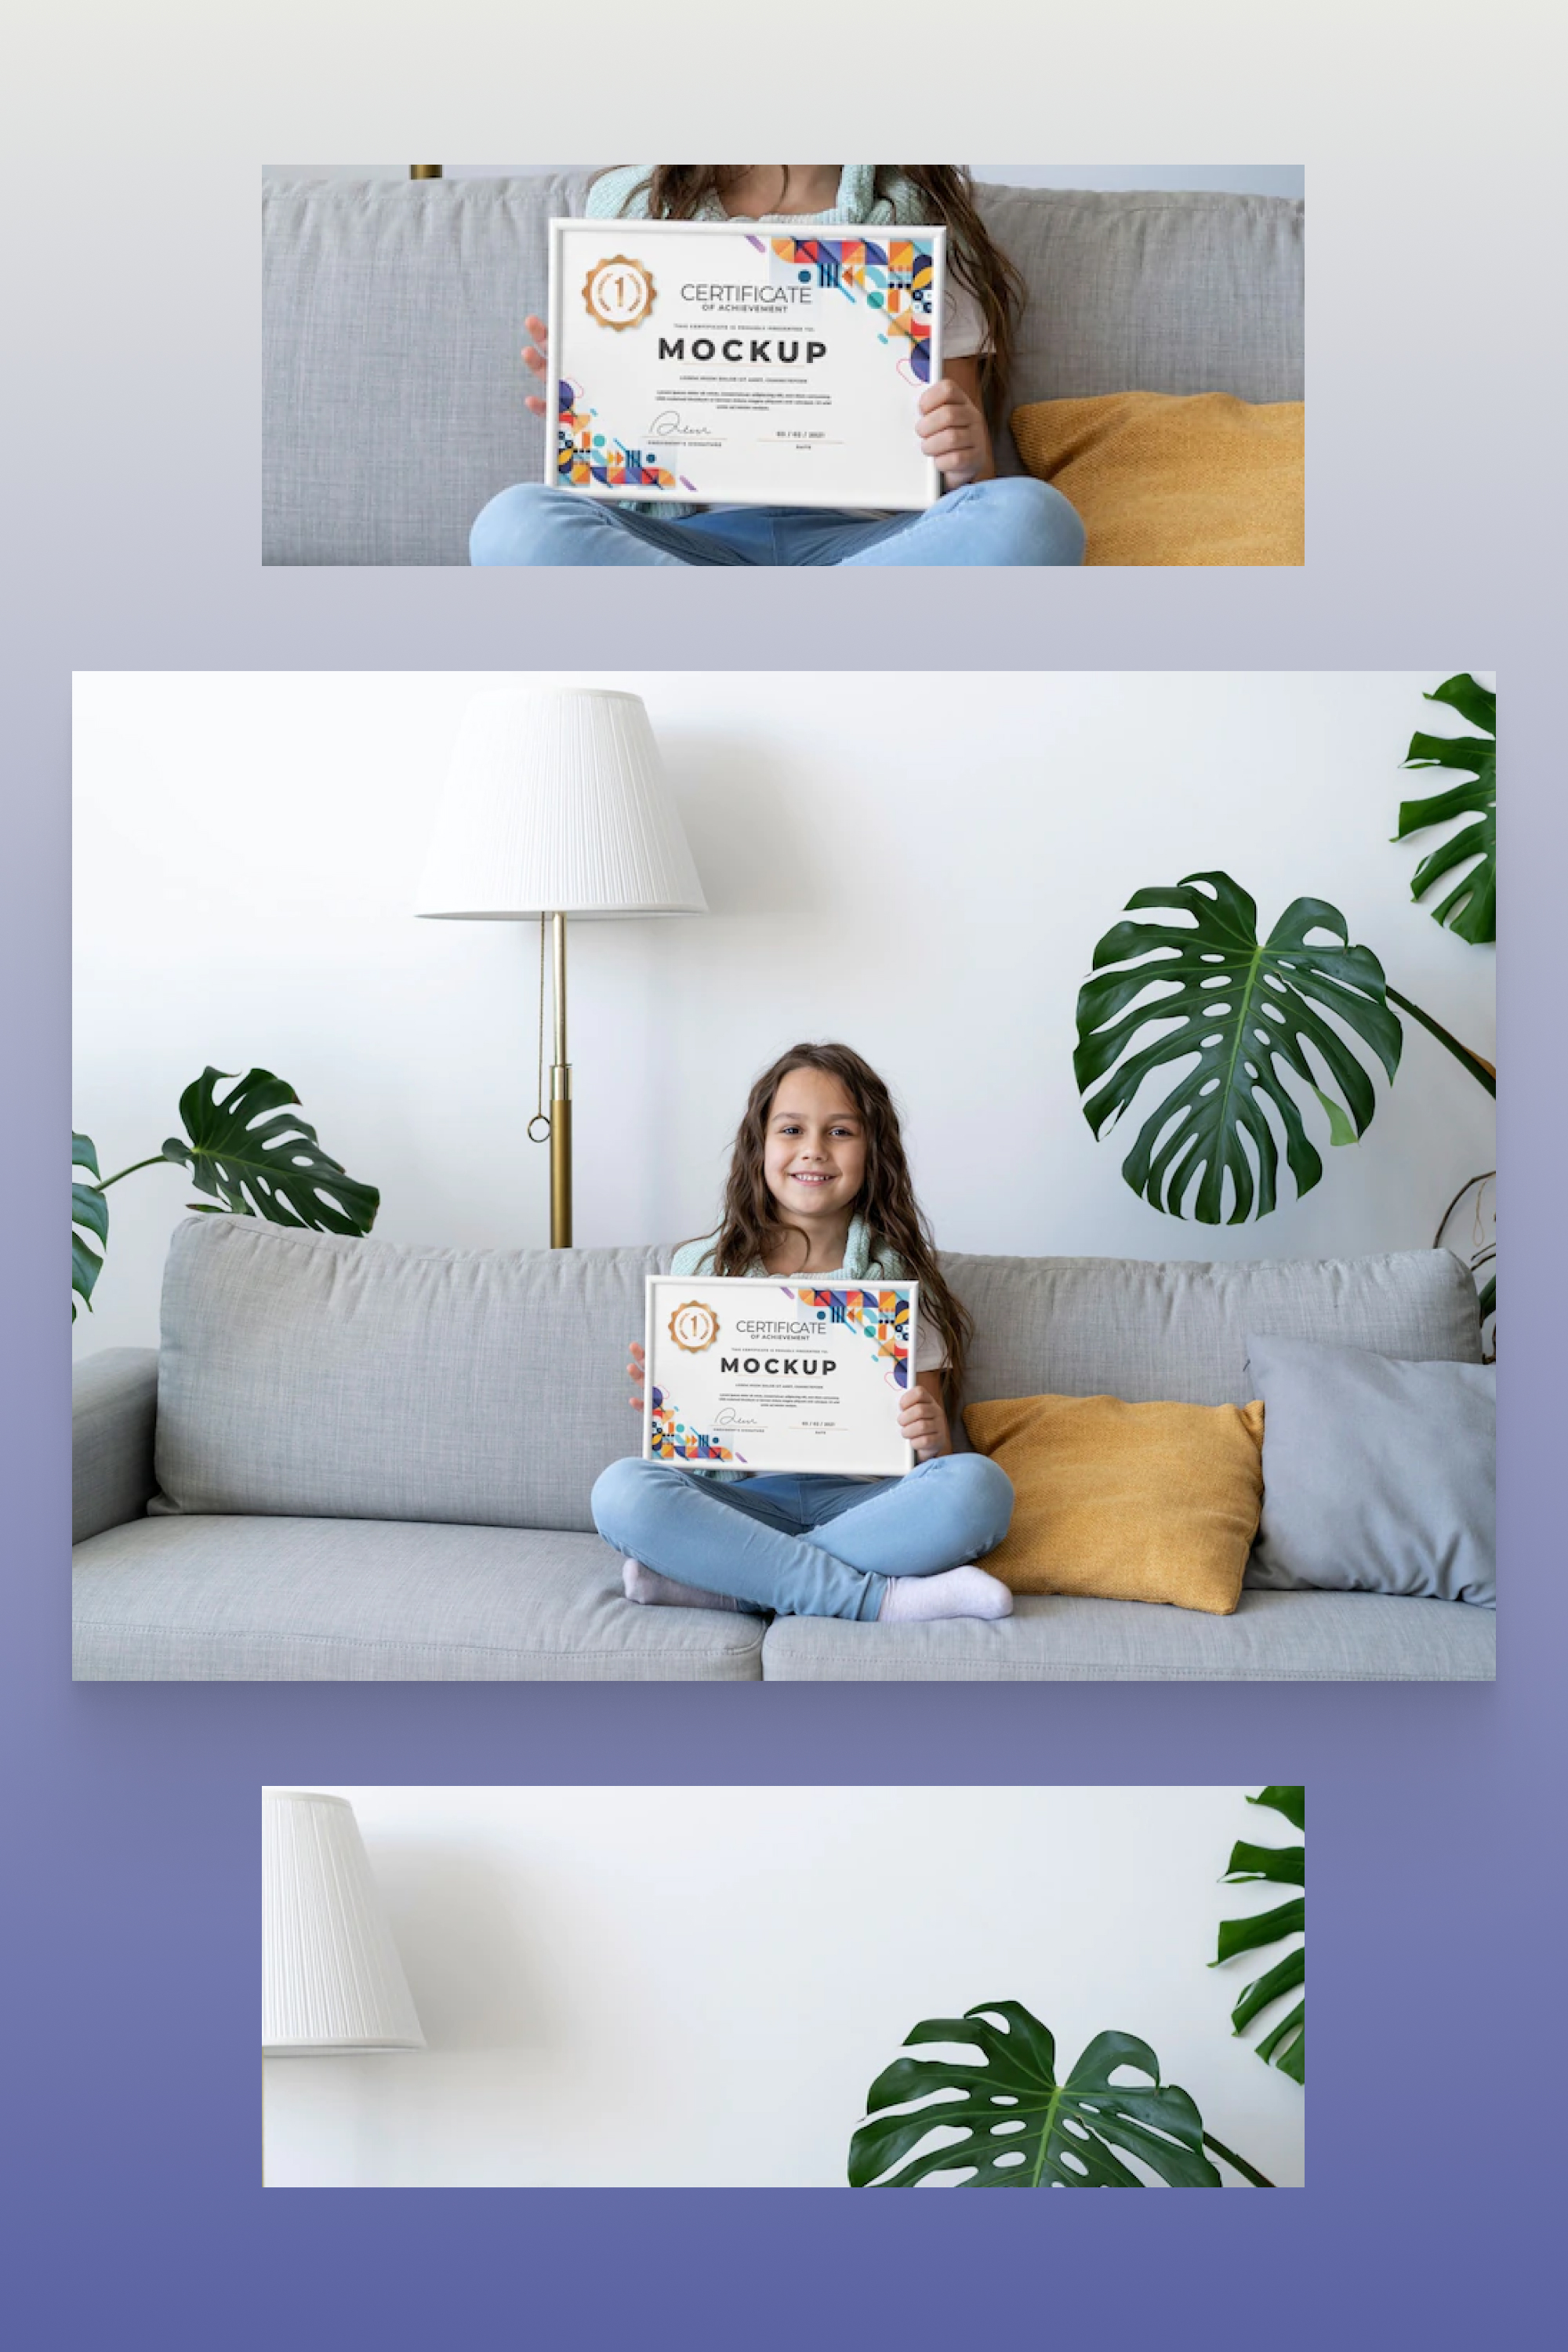 Little girl at sofa holding a certificate mock-up.